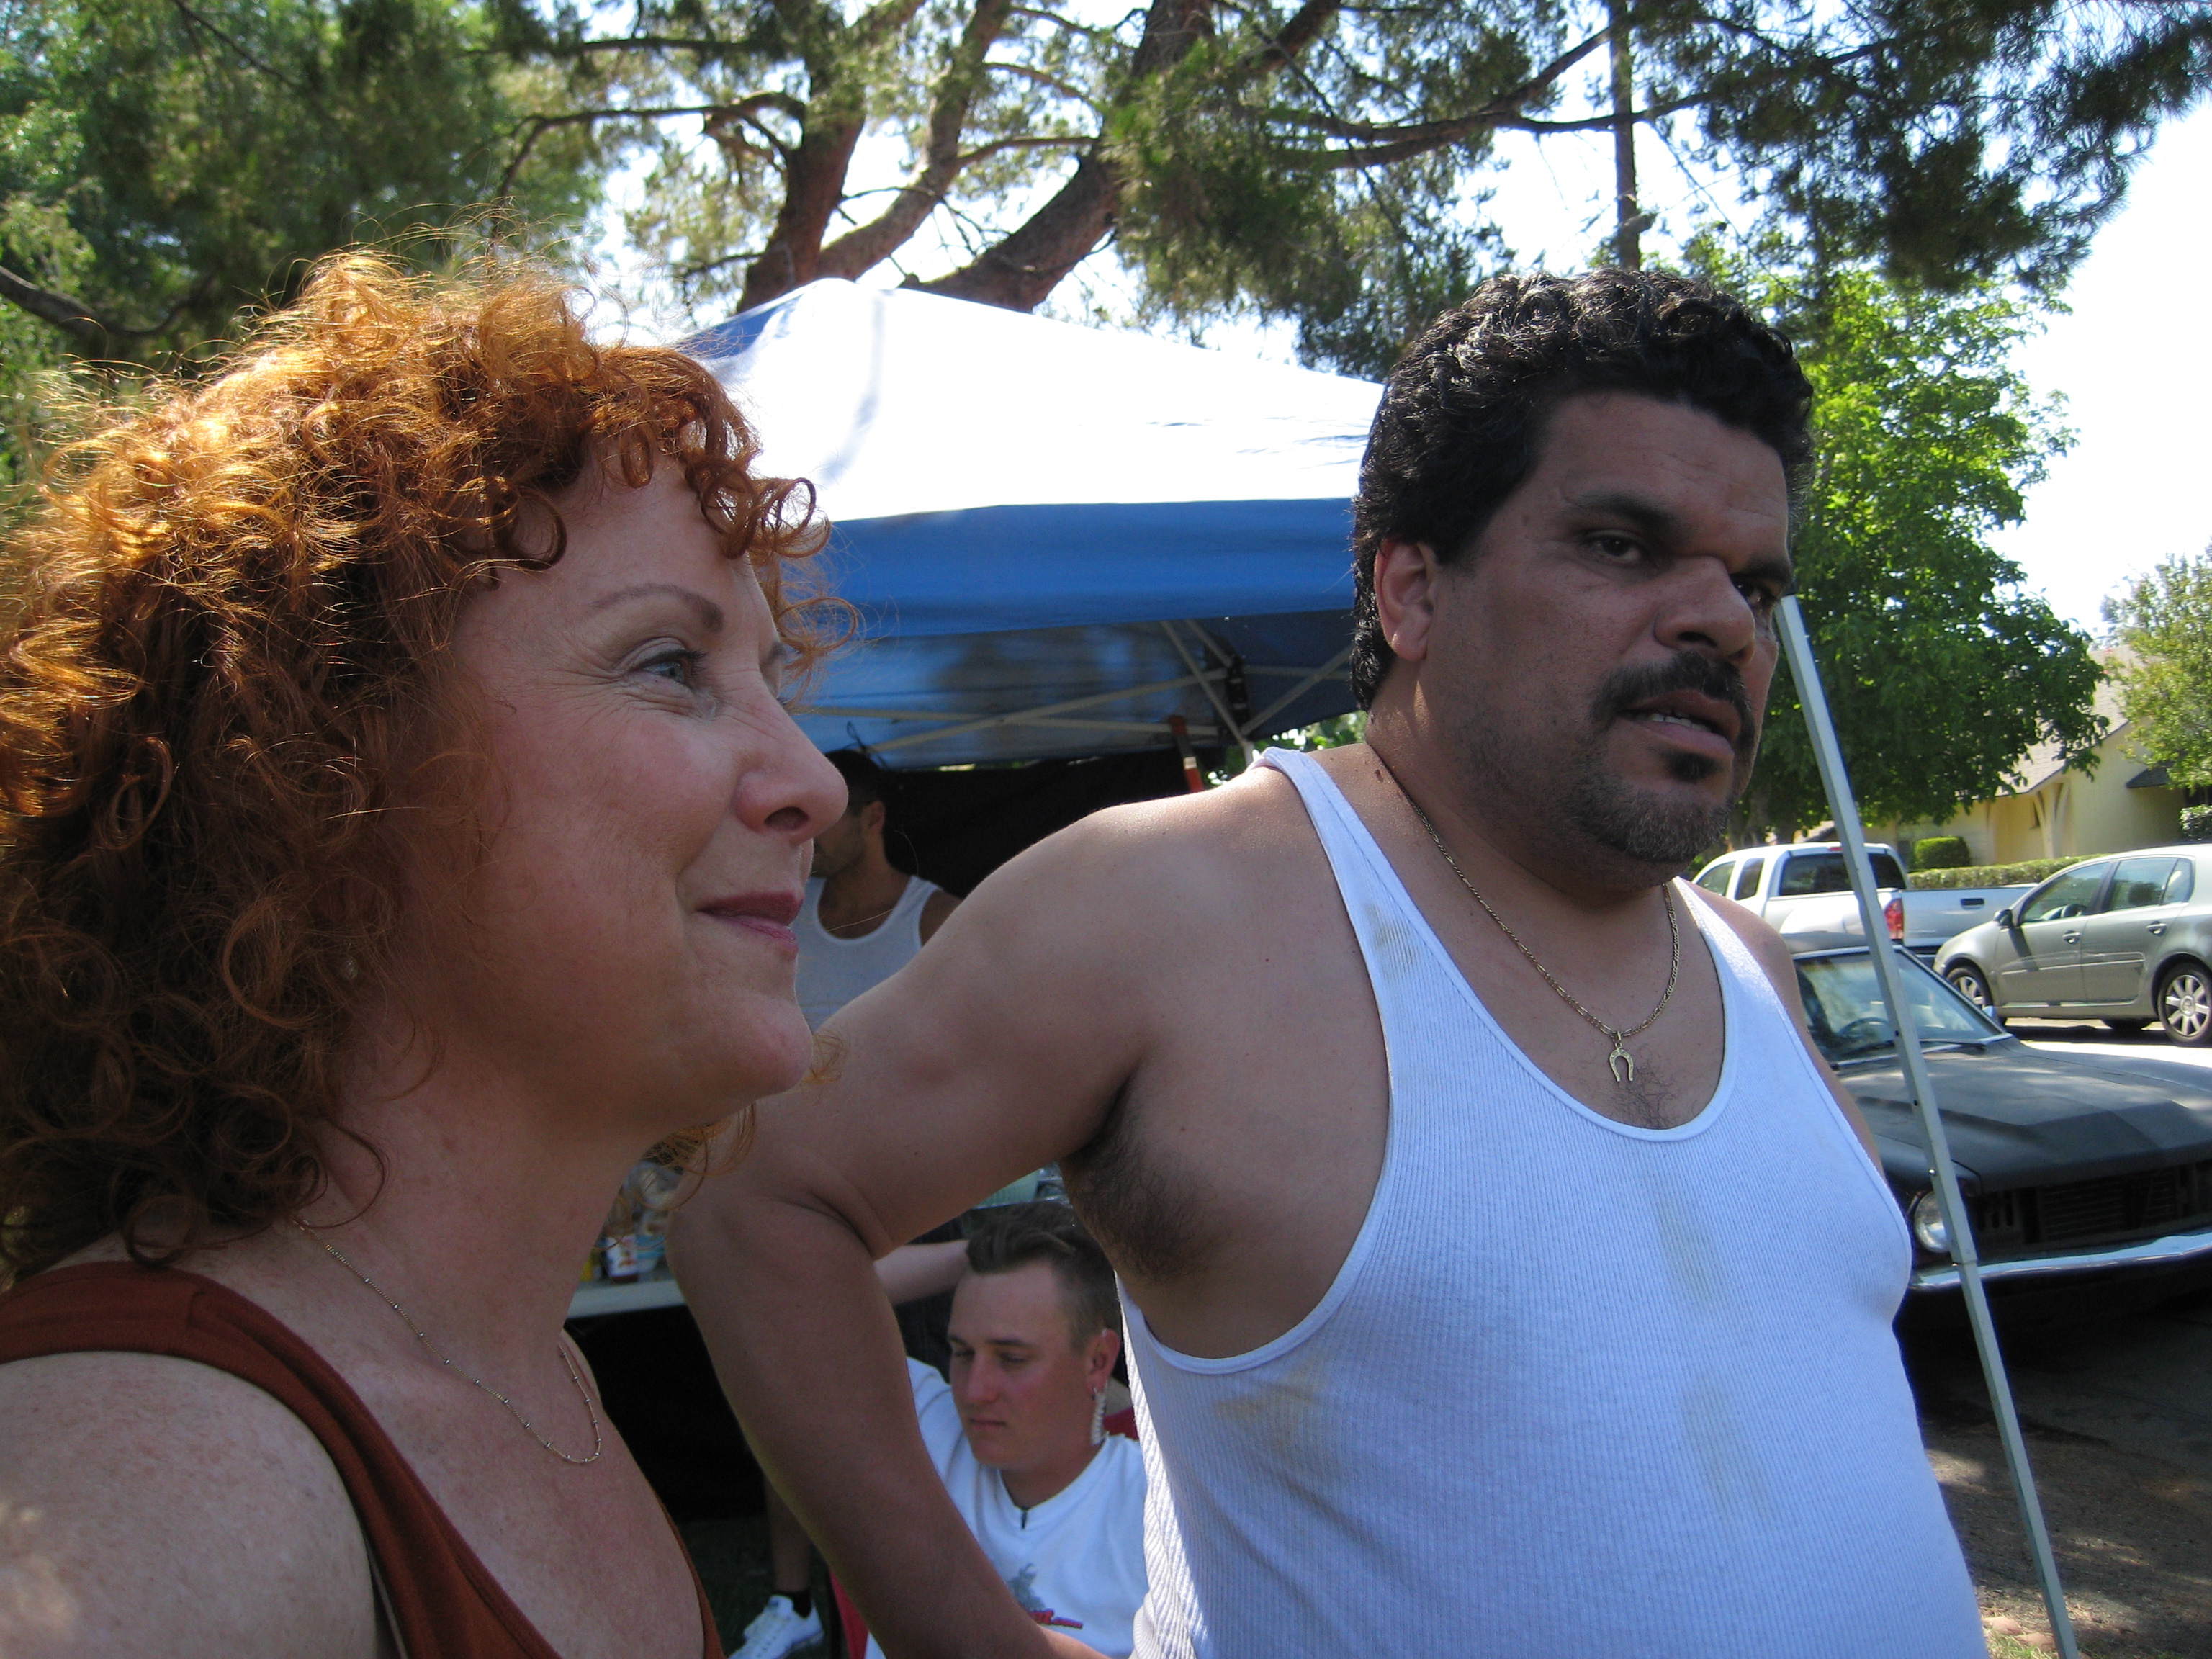 On the set of PARKSIDE. With Luis Guzman